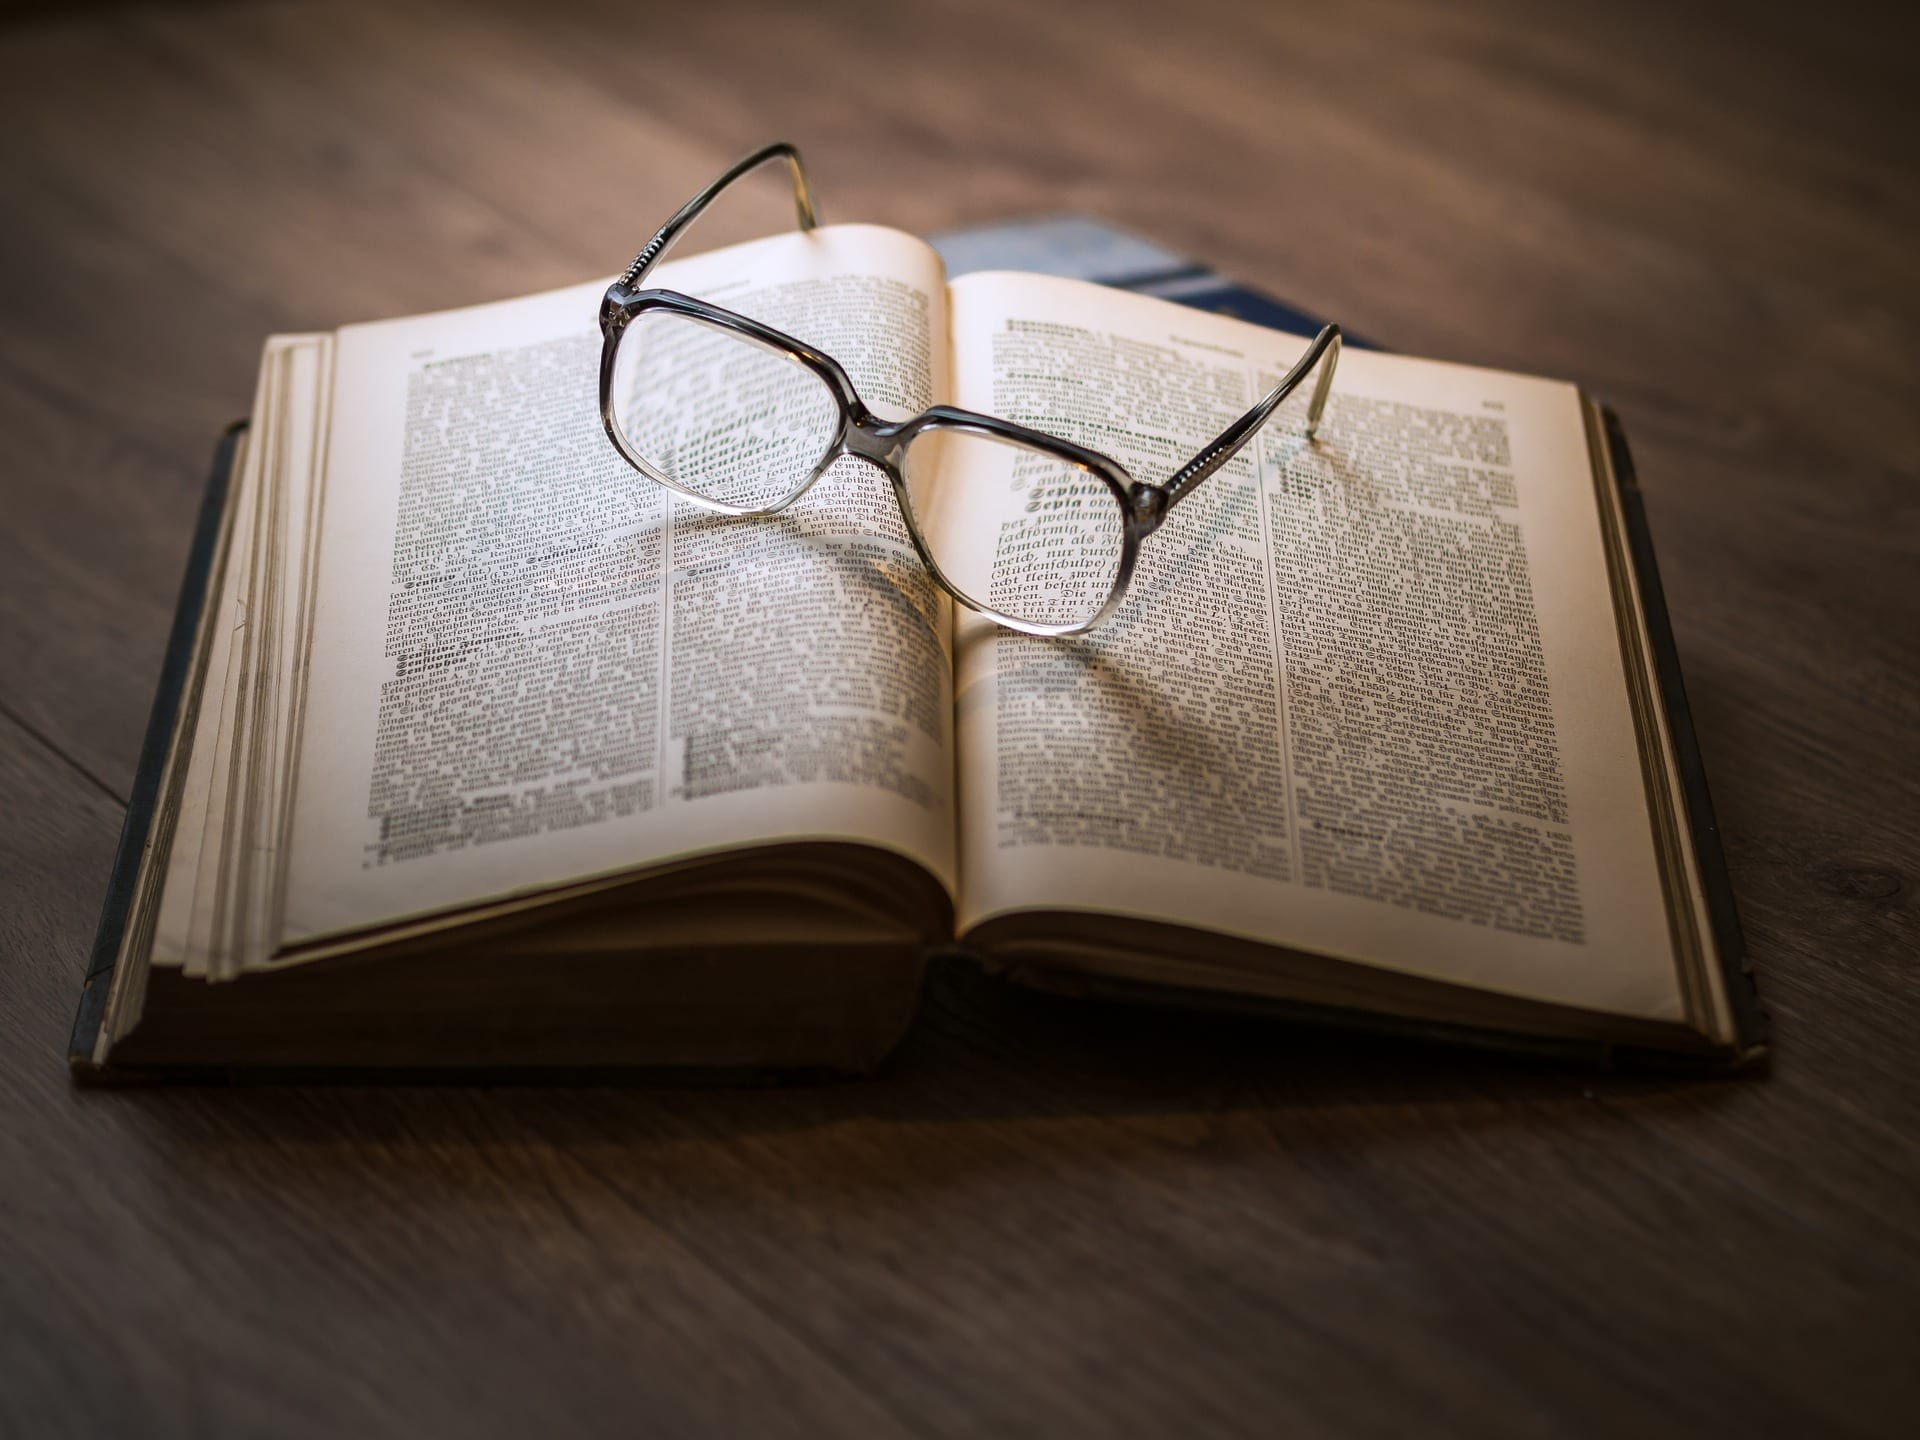 A picture of an open text based book with glasses on top.